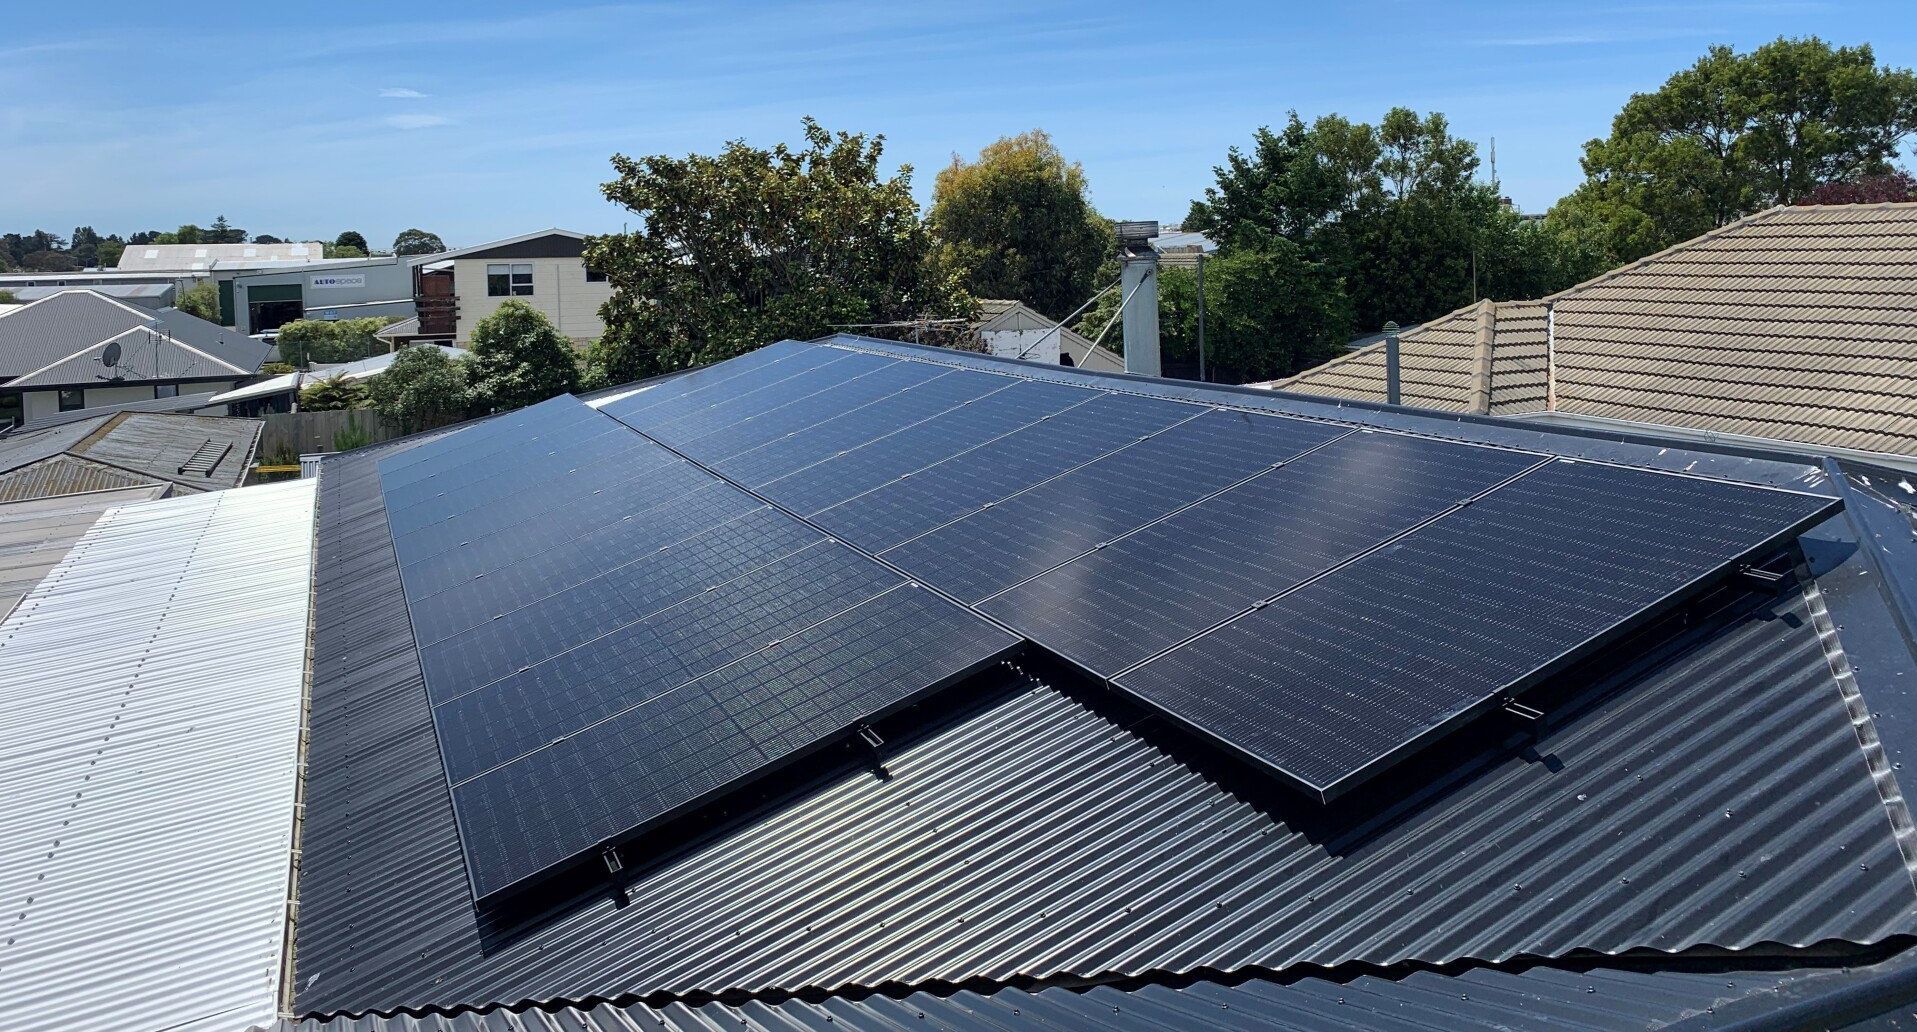 Residential roof with black solar panels